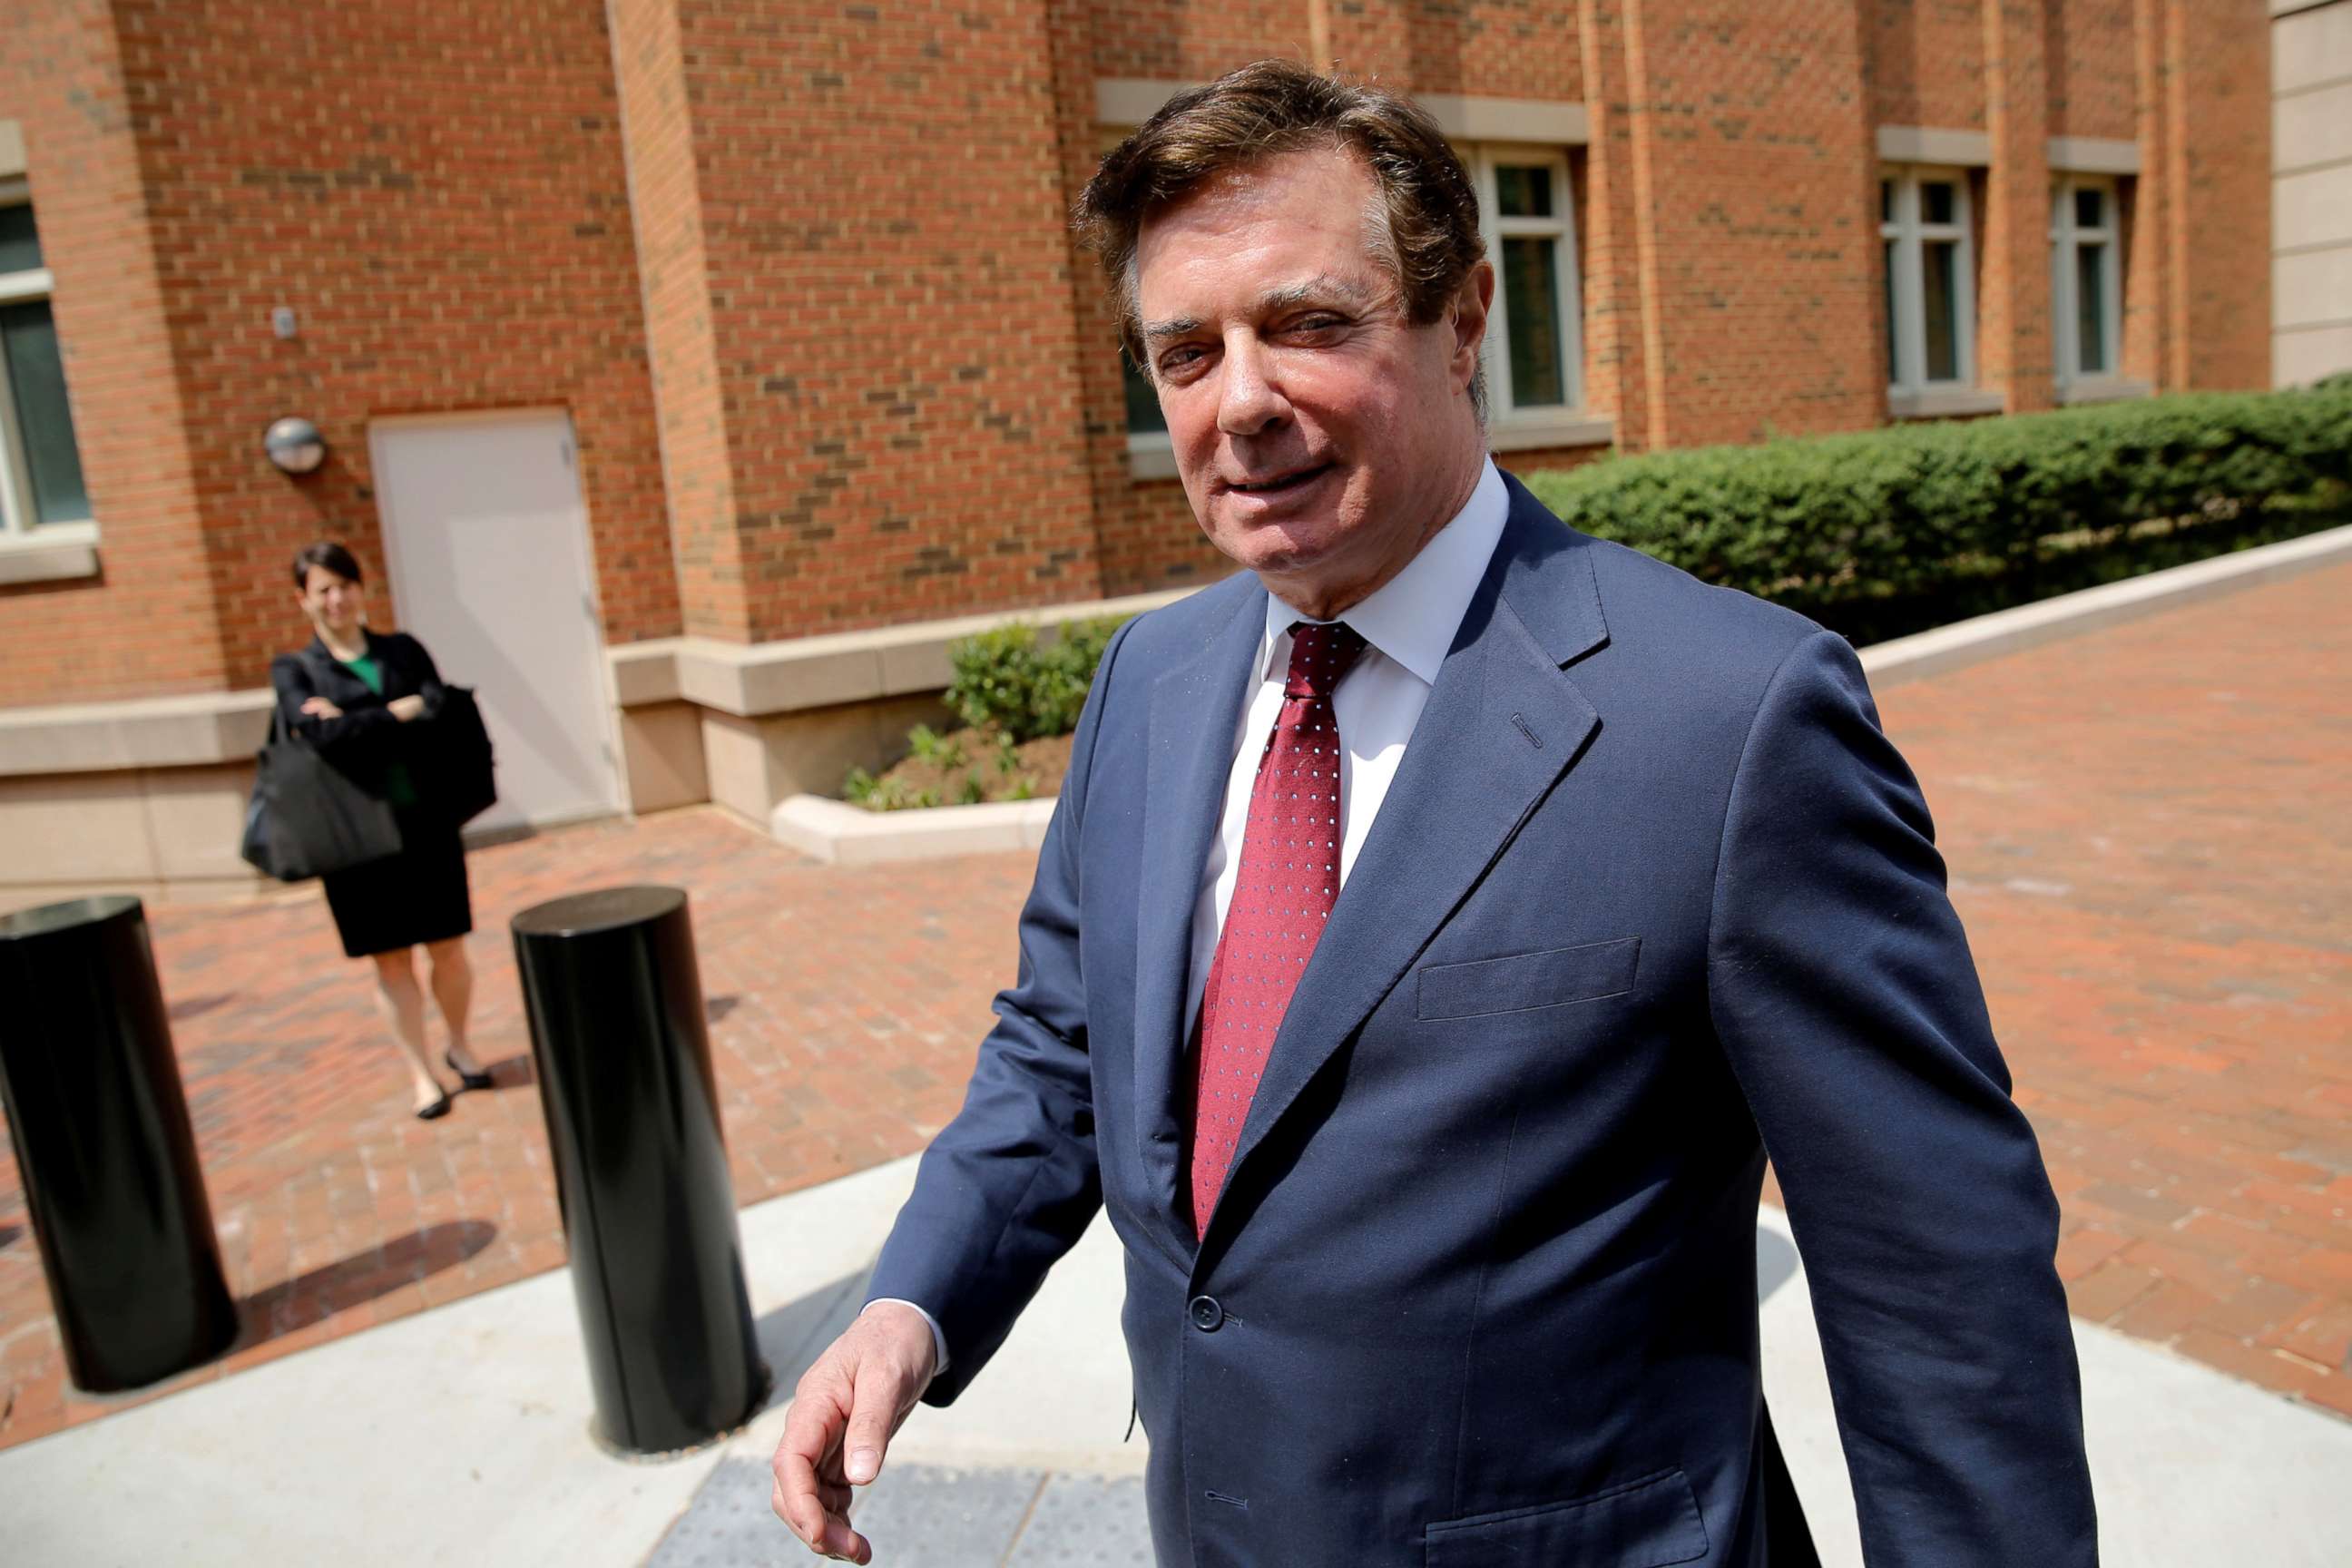 PHOTO: President Trump's former campaign chairman Paul Manafort departs U.S. District Court after a motions hearing in Alexandria, Va., May 4, 2018.